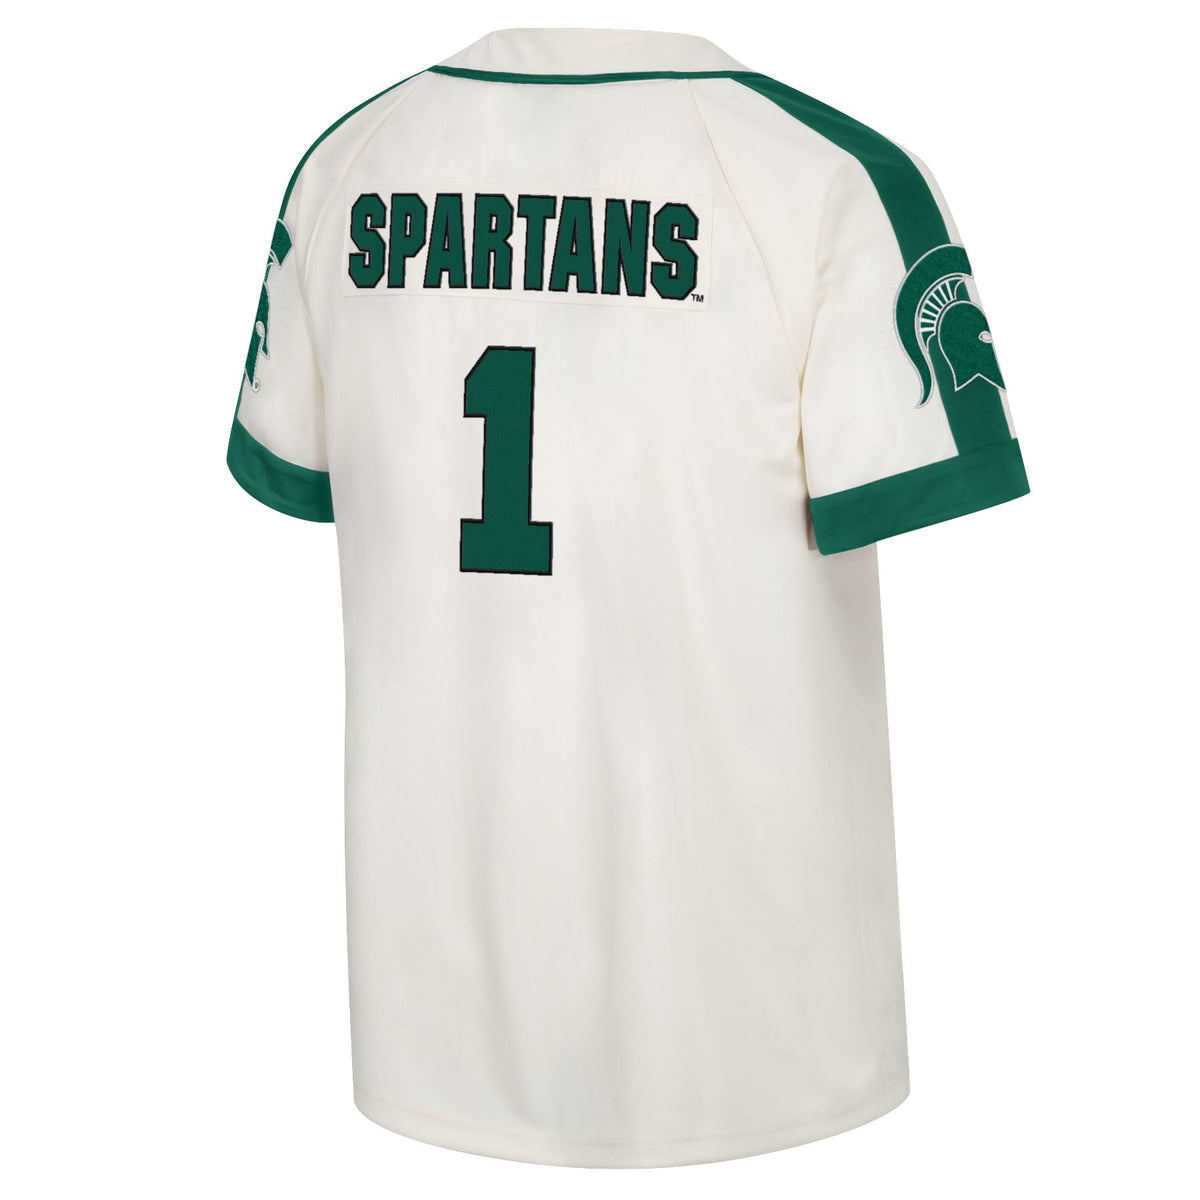 Spartans swimming legends jersey